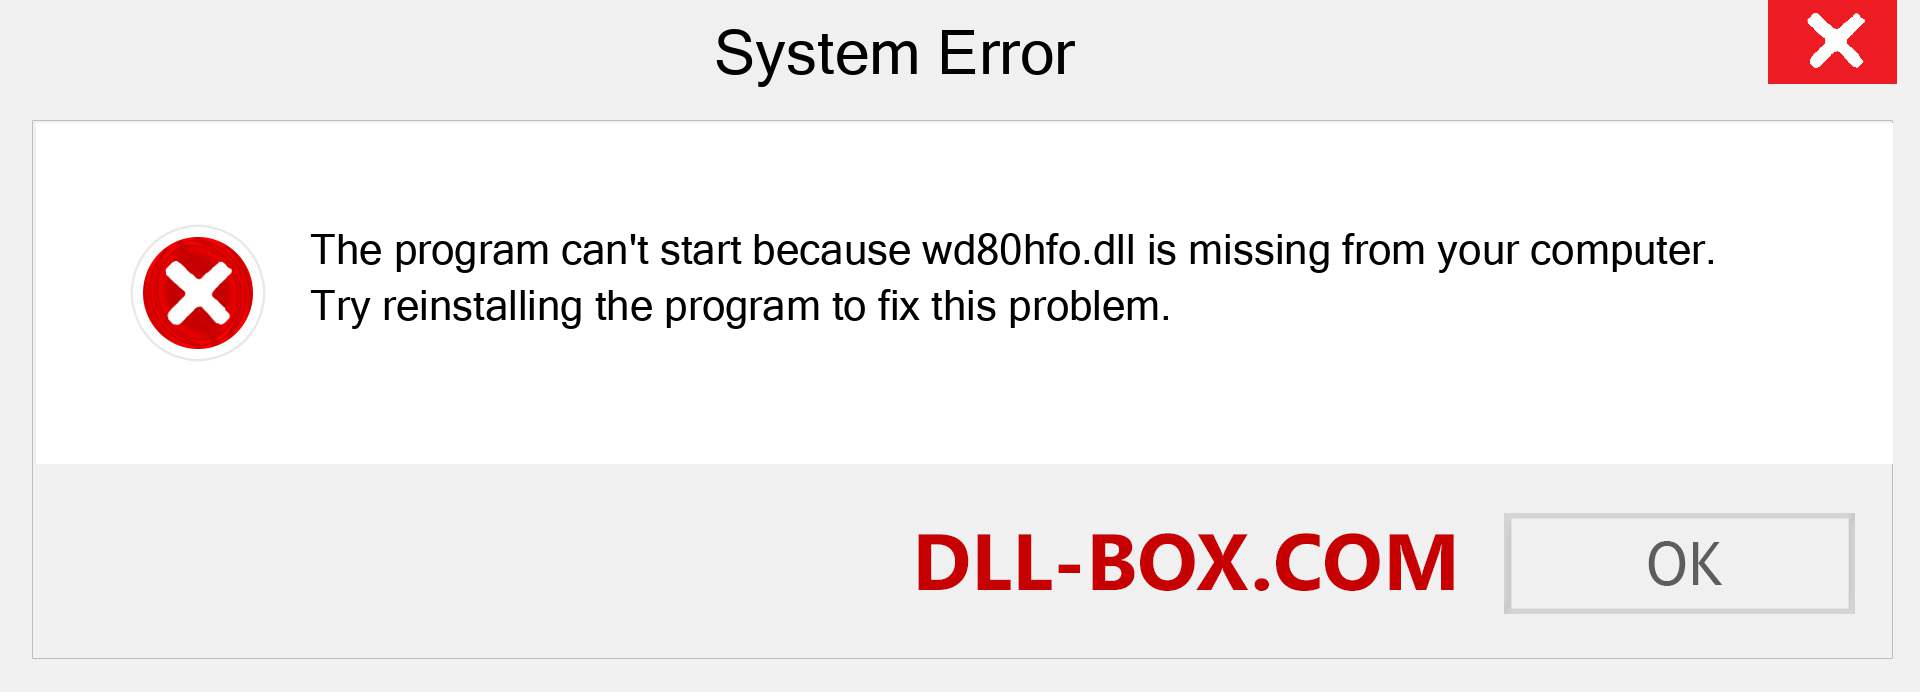  wd80hfo.dll file is missing?. Download for Windows 7, 8, 10 - Fix  wd80hfo dll Missing Error on Windows, photos, images